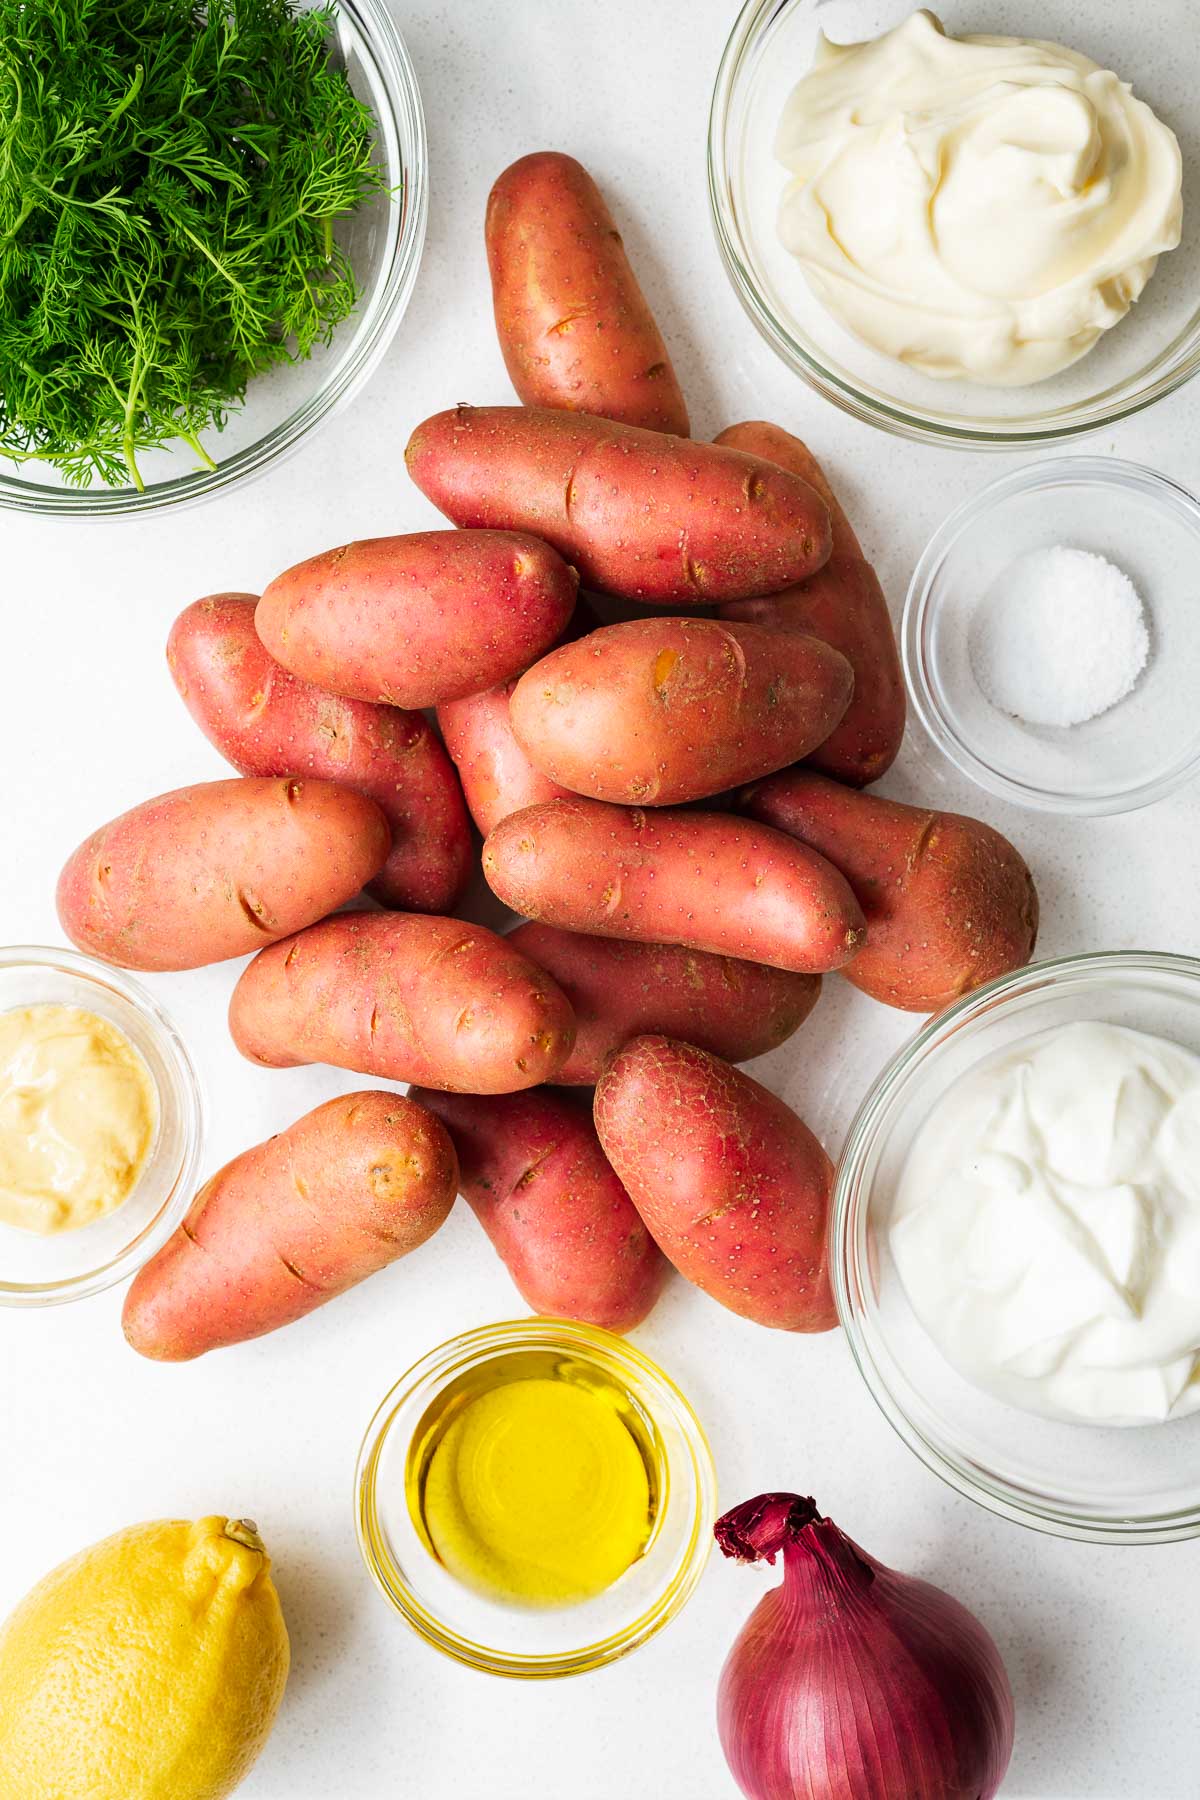 Ingredients for a red potato salad with dill and creamy yogurt dressing viewed from above.